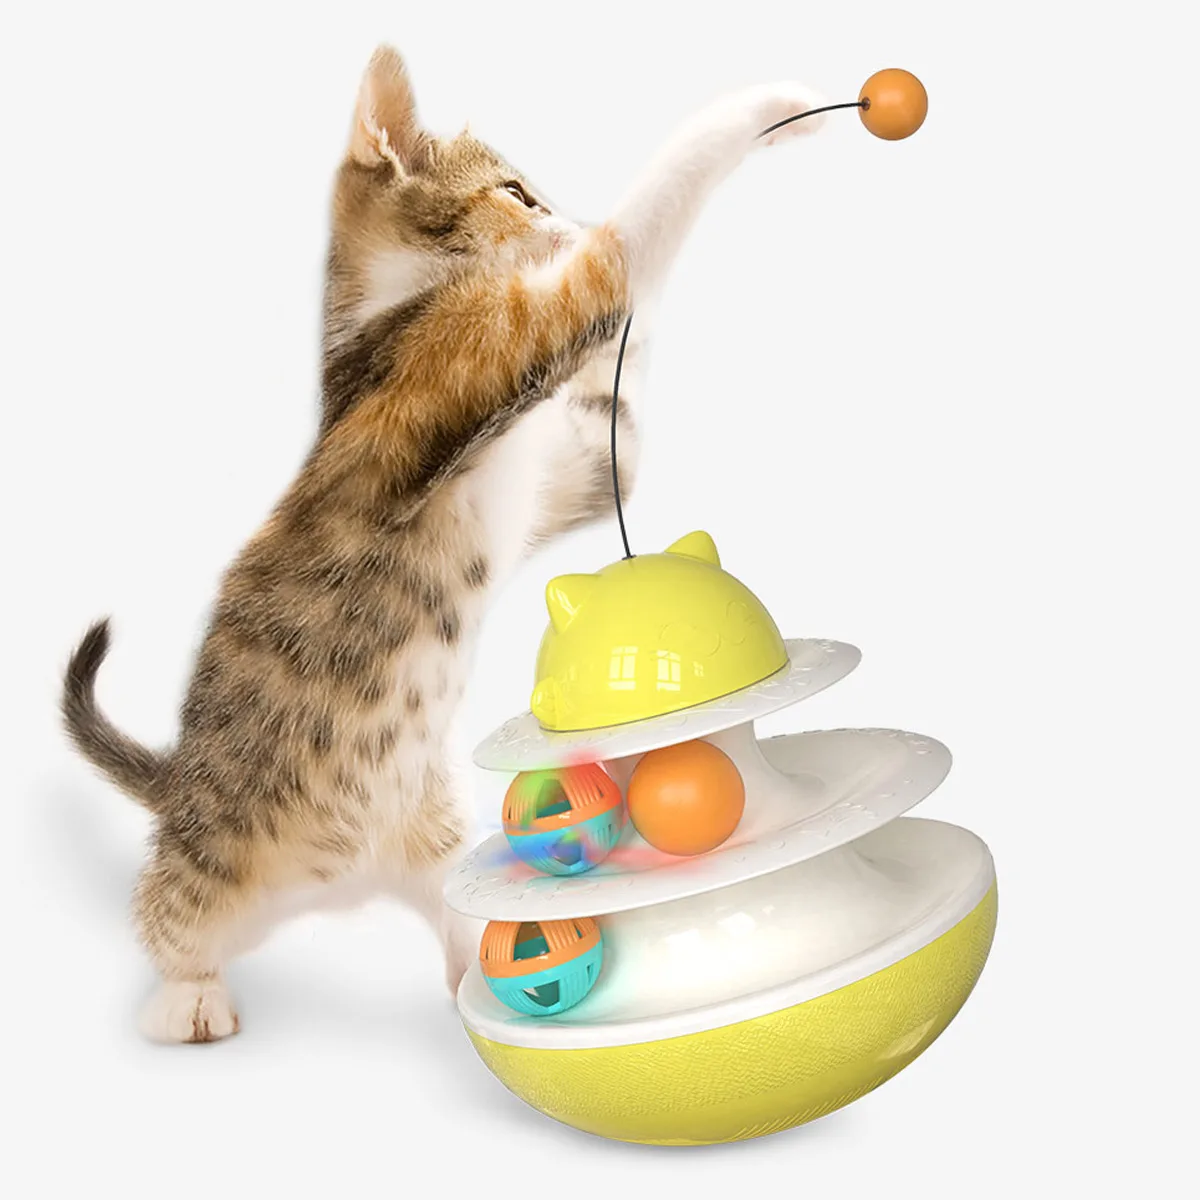 

Good Quality Toys Cats 3-levels Pet Stages Tower Tumbler Interactive Cat Traning Toy, Picture showed